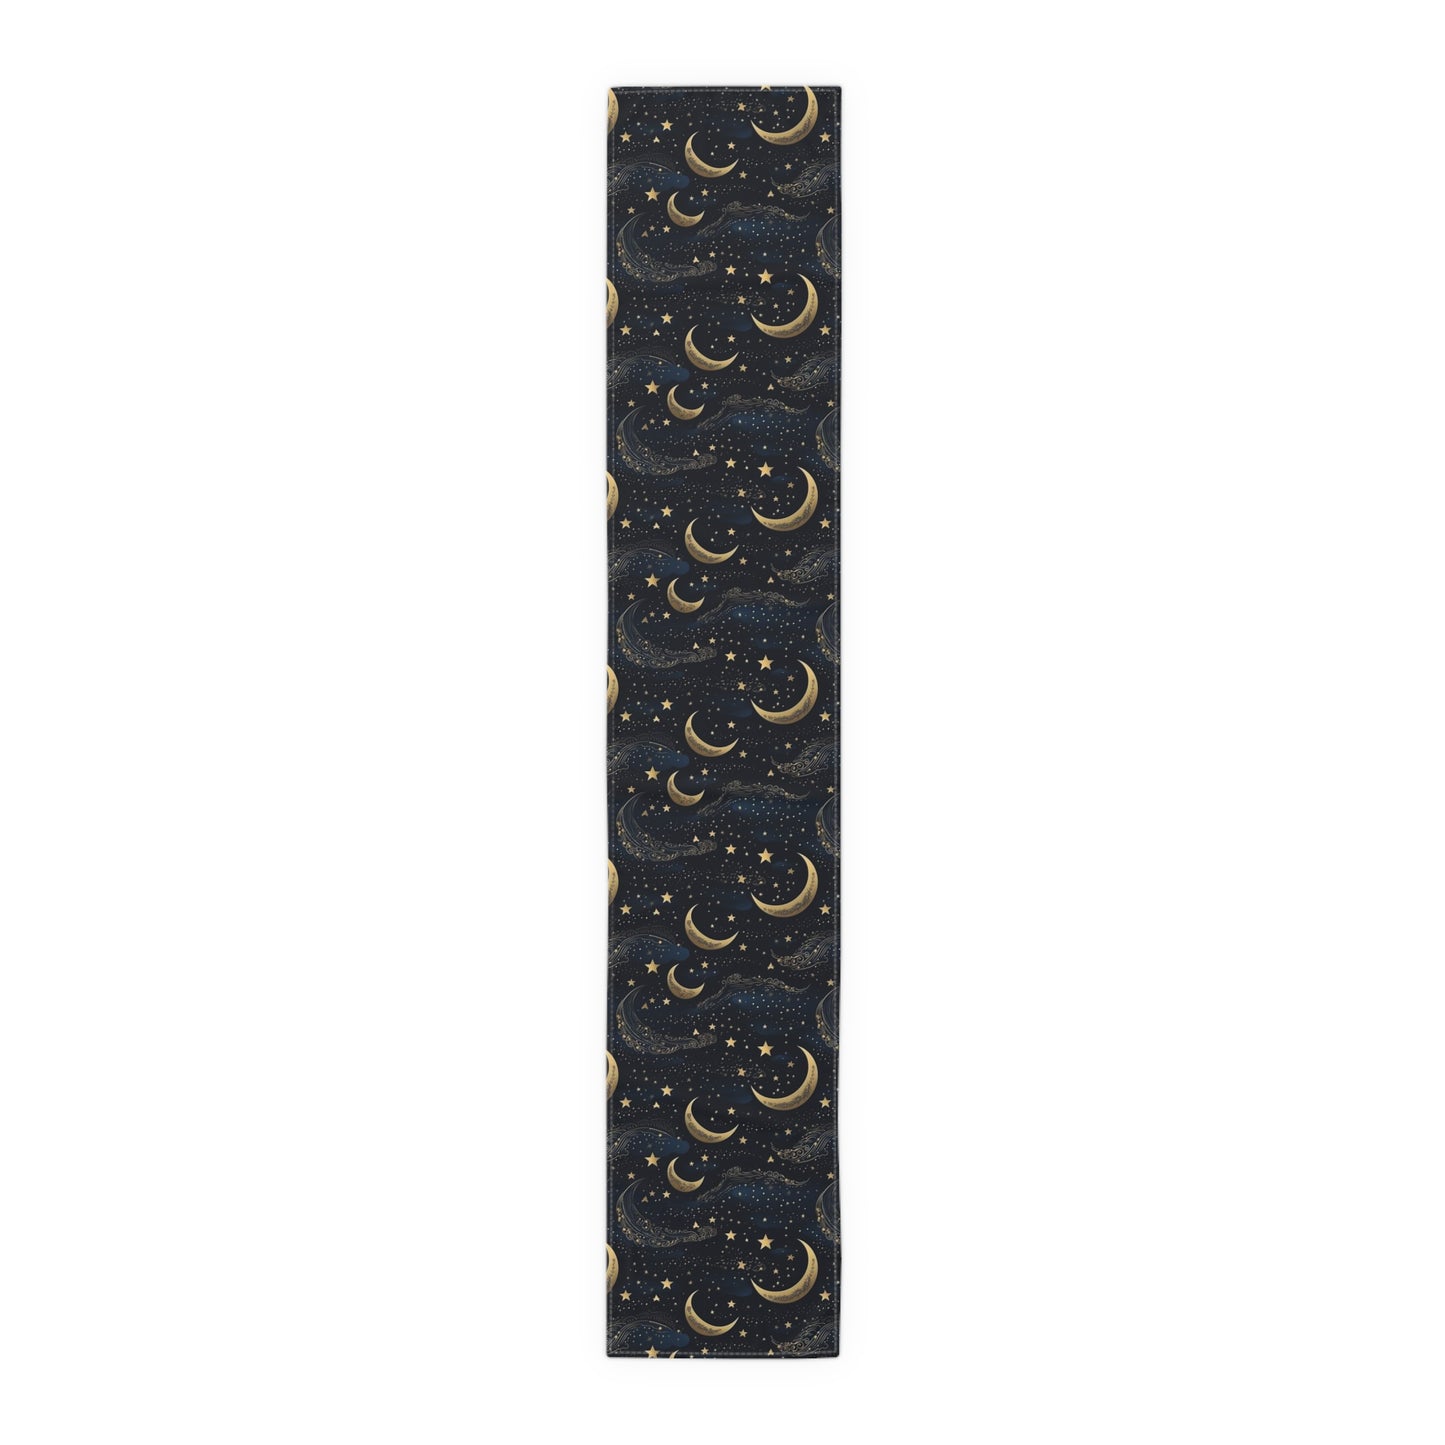 Half Moon Stars Table Runner, Starry Night Sky black Gold Clouds Cottagecore Witchy Decor Cloth Decoration Tablecoth Cotton Dining Linen Starcove Fashion